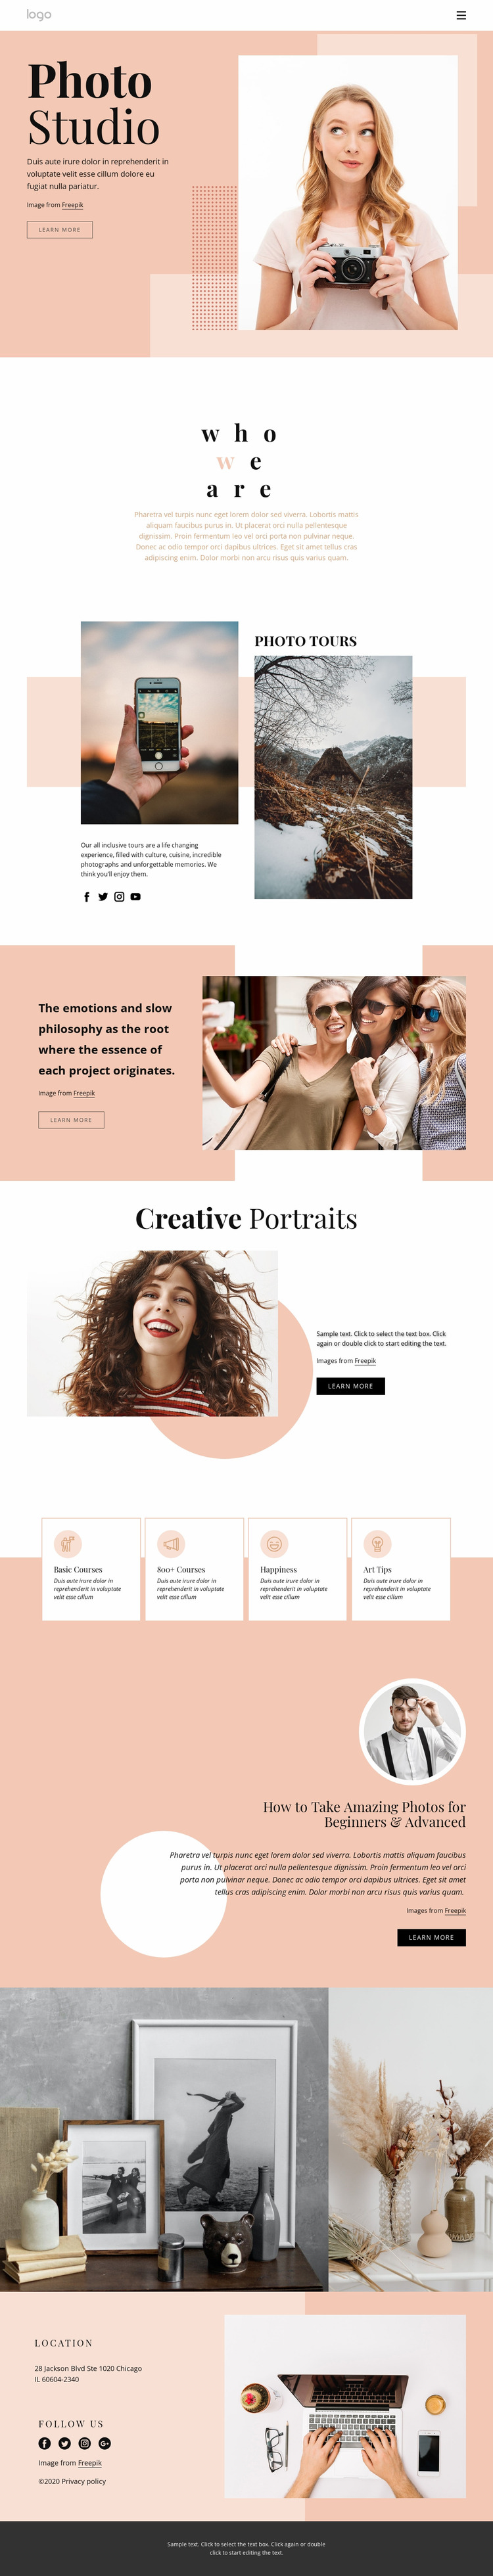 Photography courses Html Website Builder